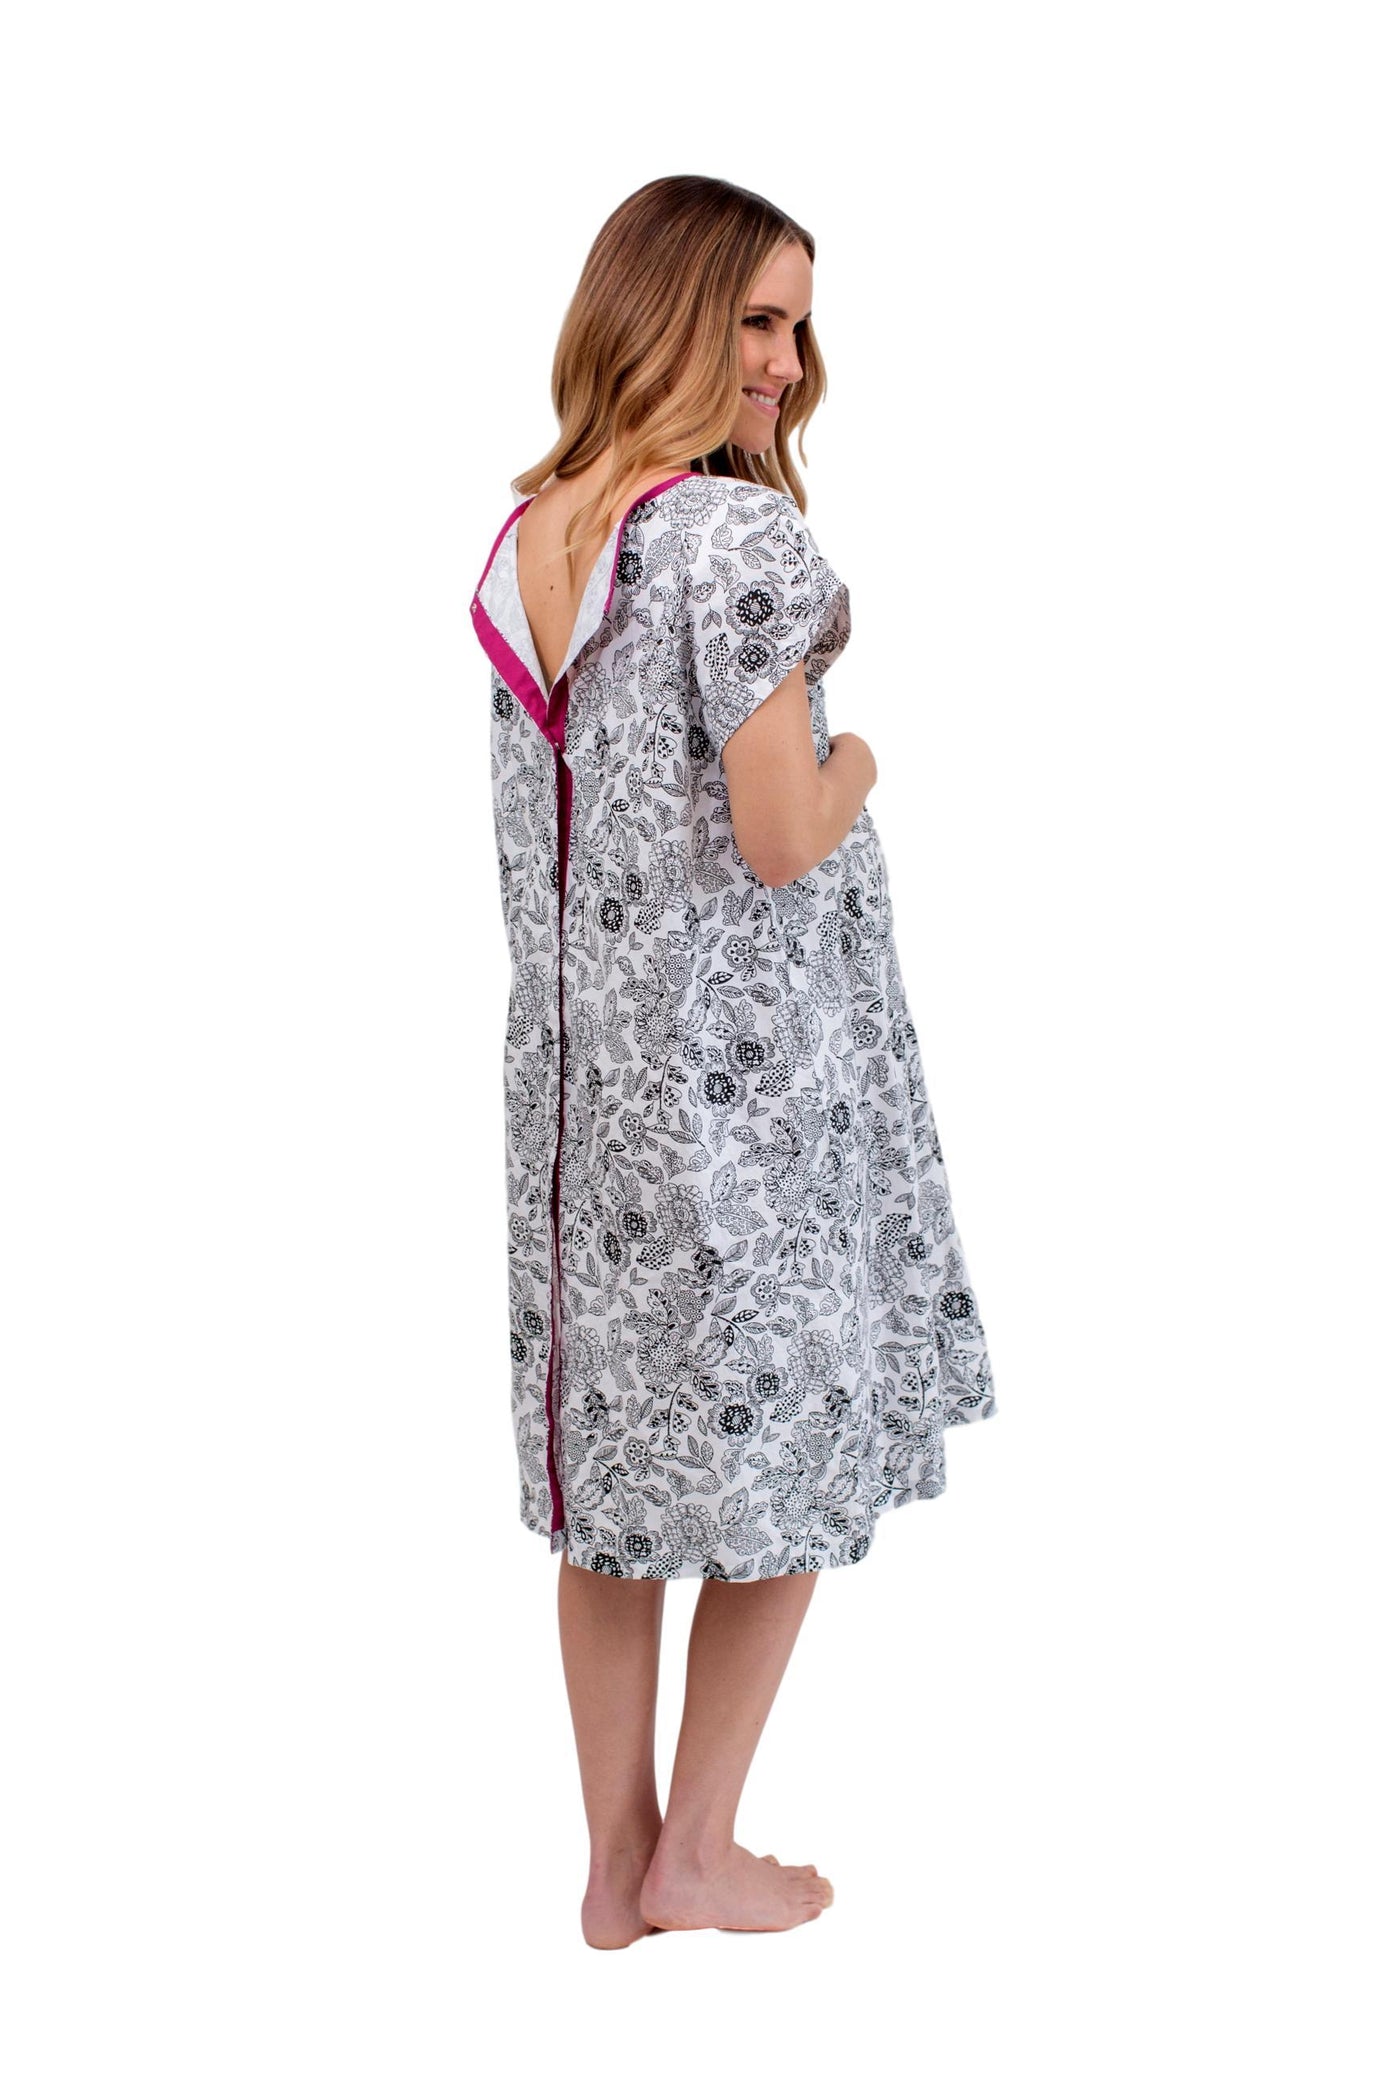 Gownies: Designer Hospital Maternity Gowns – Gownies™